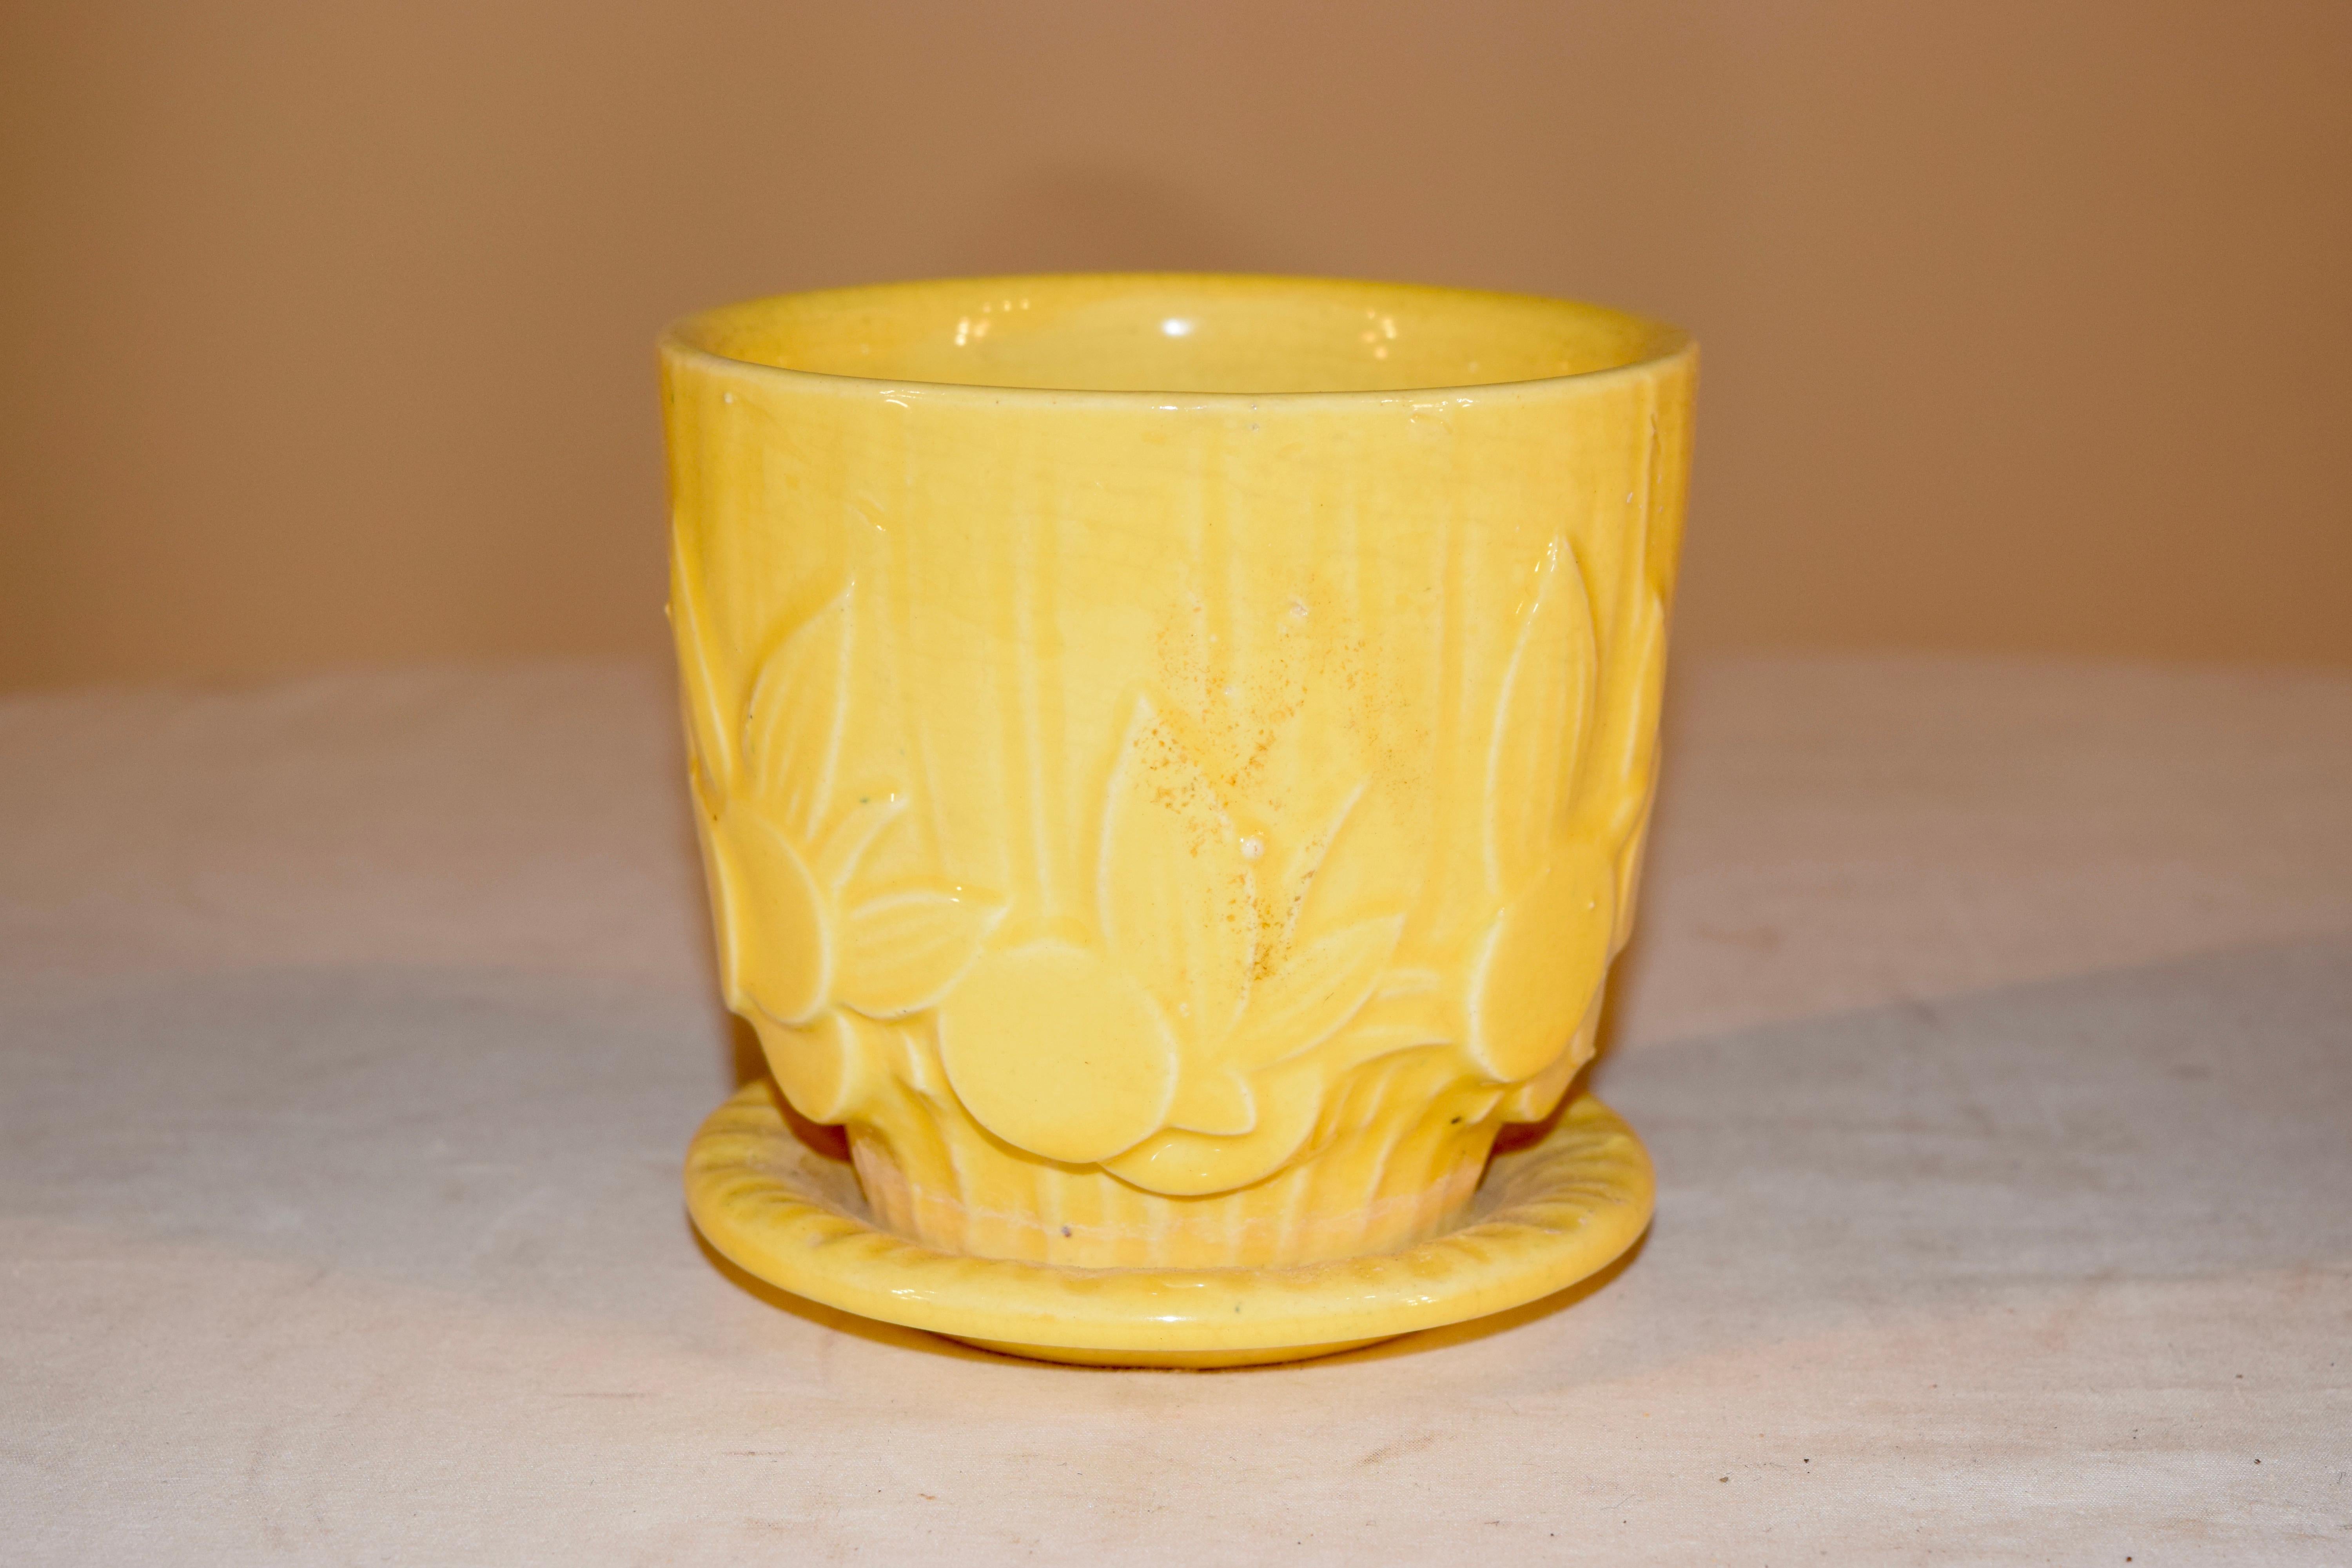 1940s American small flower pot with attached saucer. The flower pot has a sweet molded pattern with fruit and leaves on it, and there is a drain in the bottom of the pot.